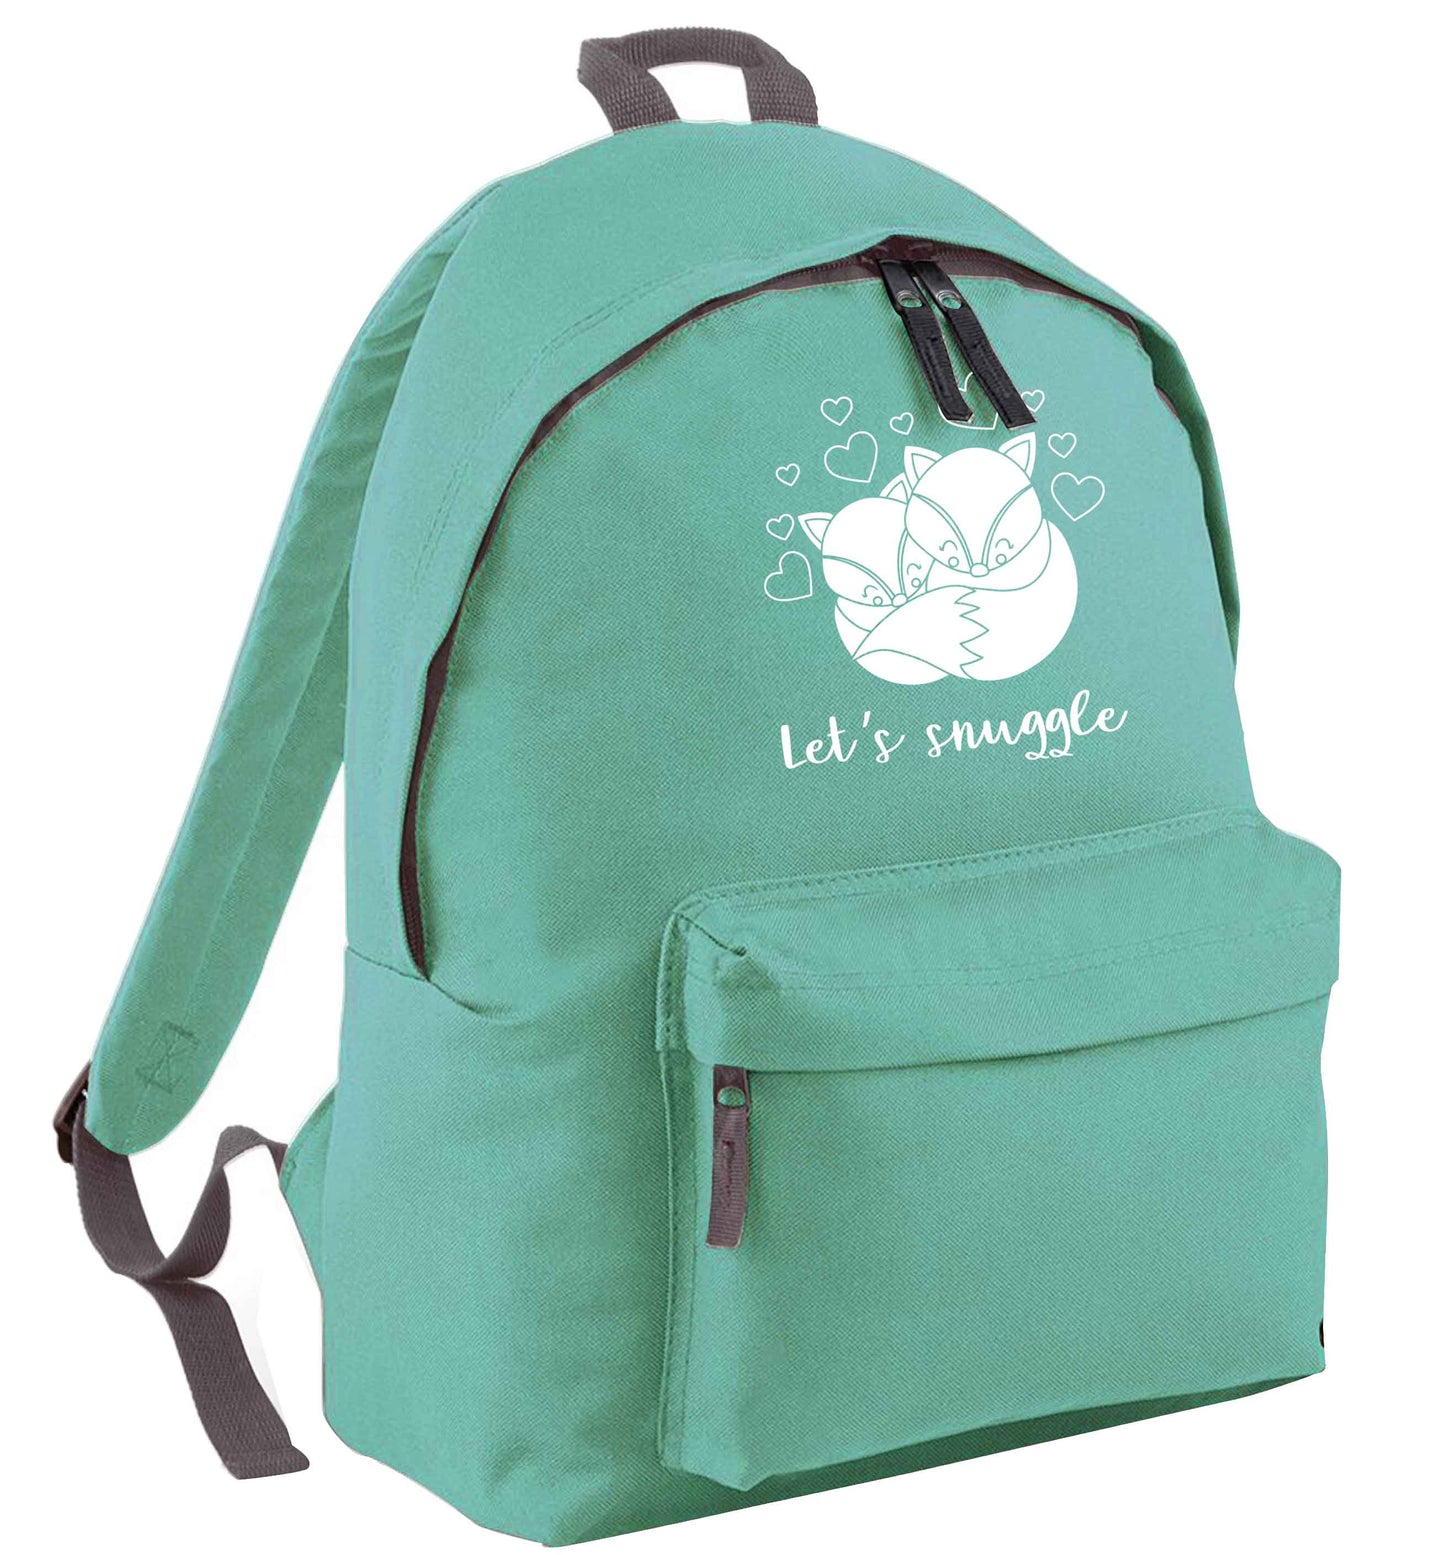 Let's snuggle mint adults backpack